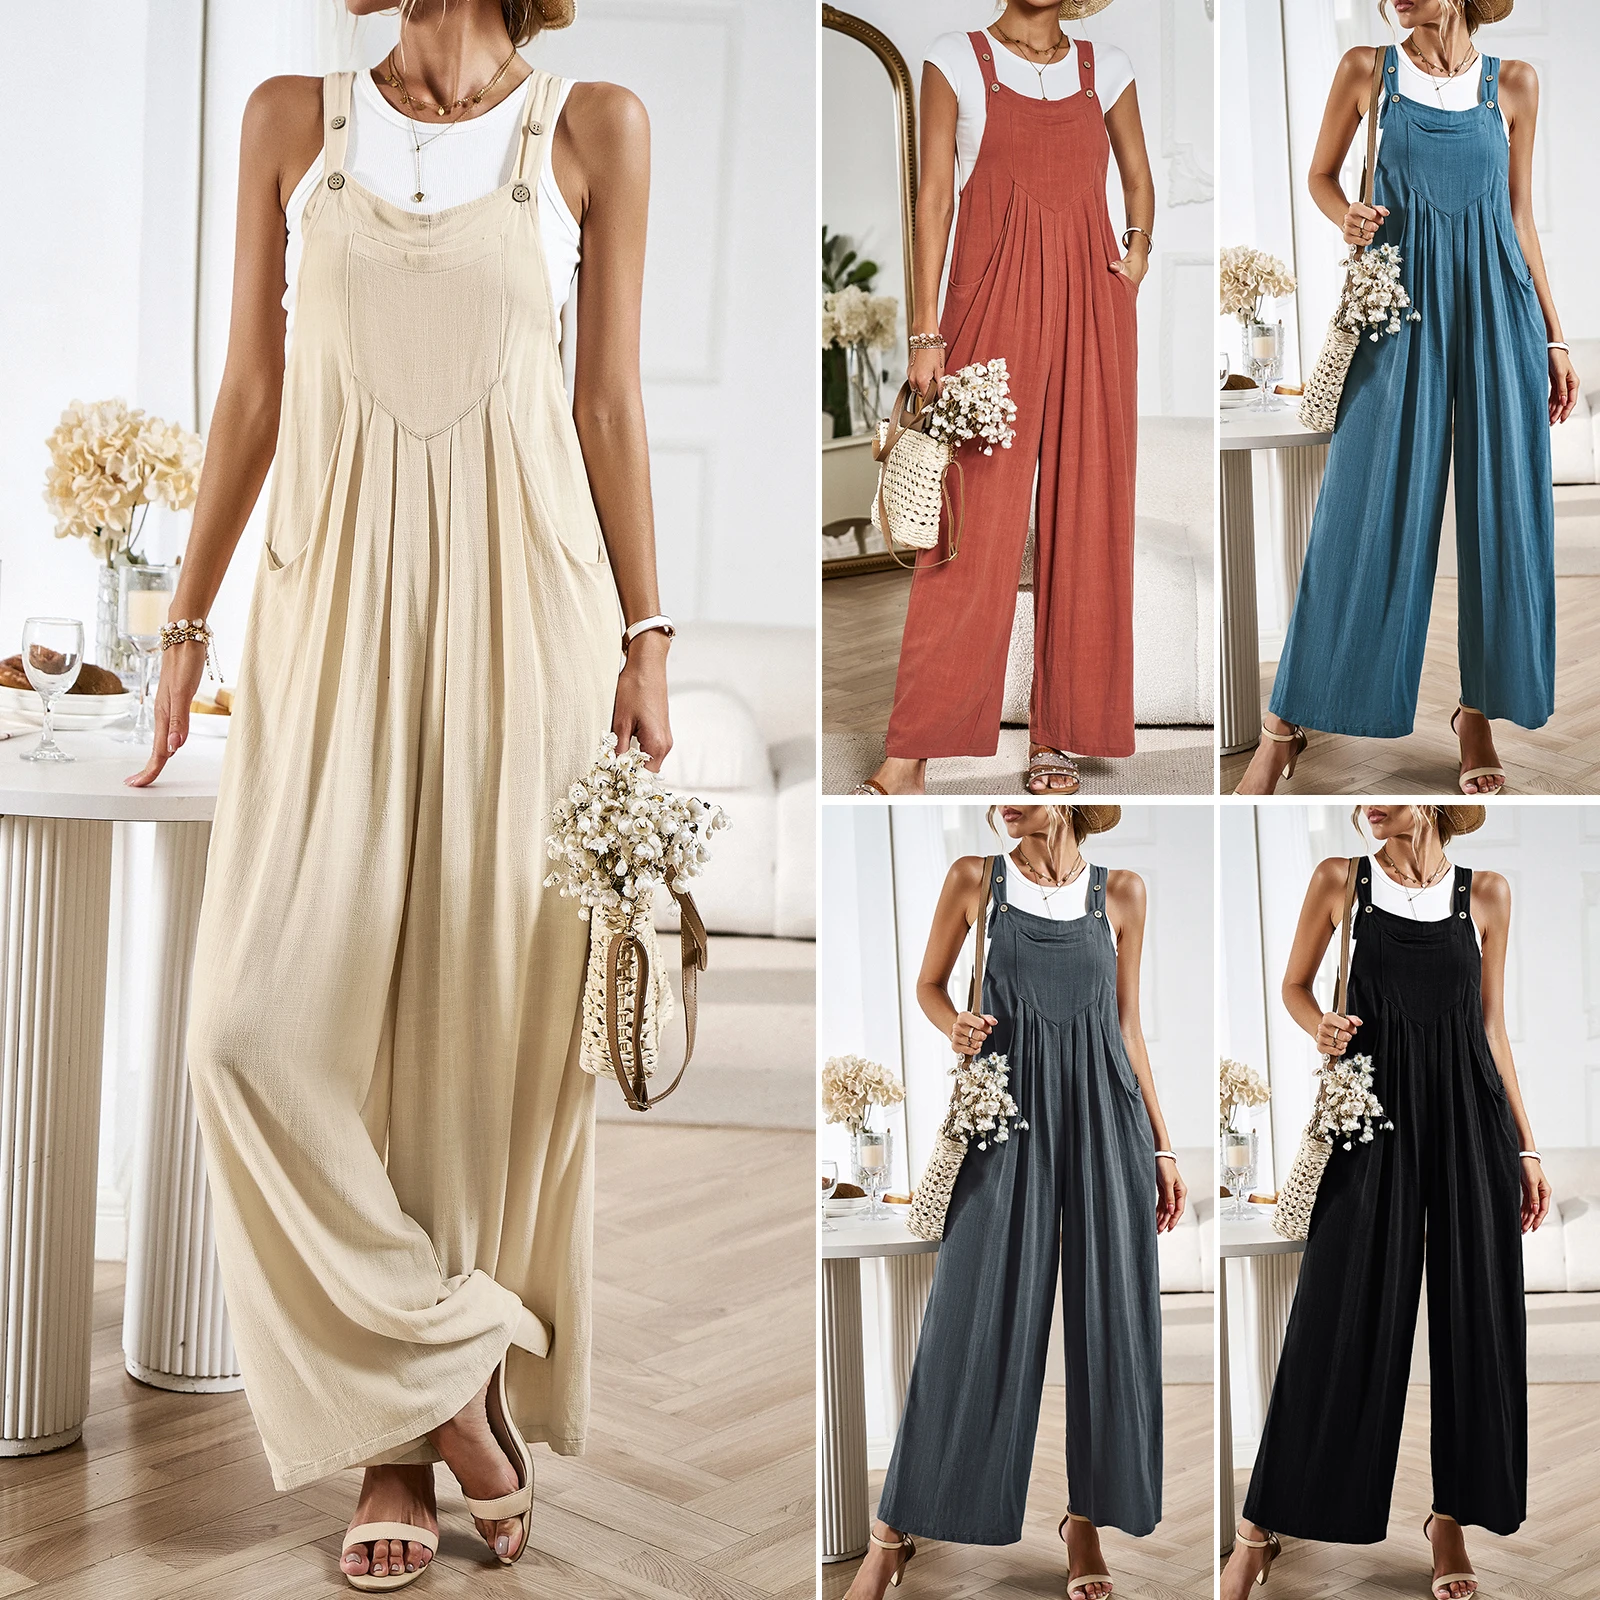 Adjustable Straps Loose Overalls Fashion Casual Button Wide Leg Straight Jumpsuit Summer Sleeveless Trousers with Pockets Romper sexy zipper denim jumpsuit 2022 women slim straps jumpsuit bodysuit with pockets jumpsuit straps trousers jumpsuit